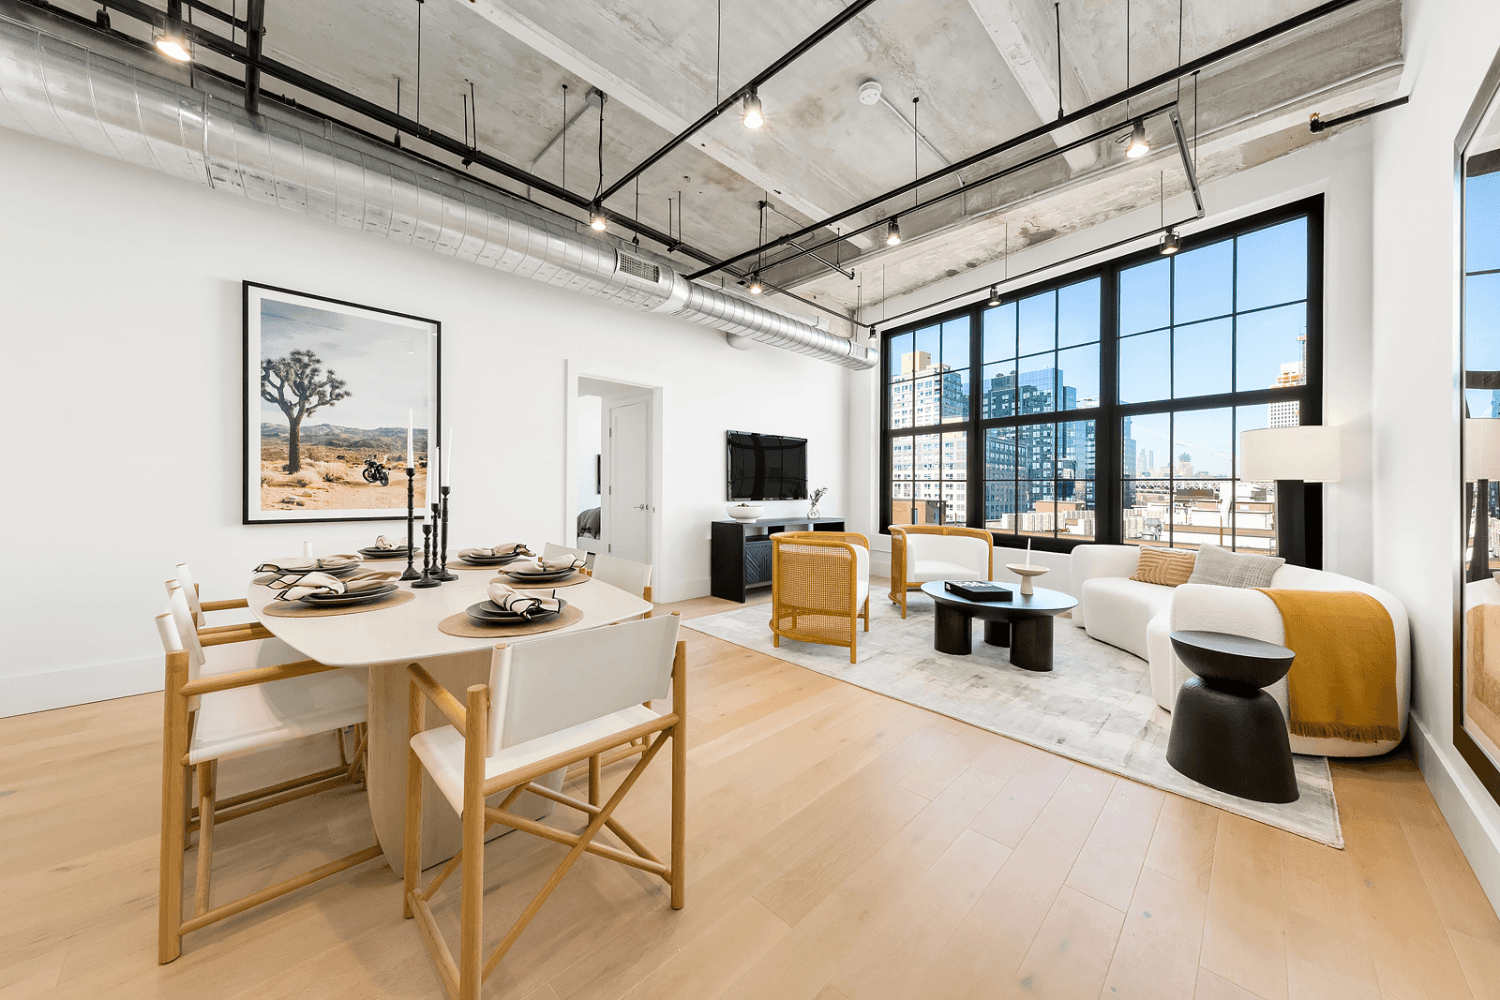 Experience a luxurious rental lifestyle in one of the city's most desirable waterfront neighborhoods in this impeccably crafted 2 bedroom, 2 bathroom corner apartment at Williamsburg Lofts.